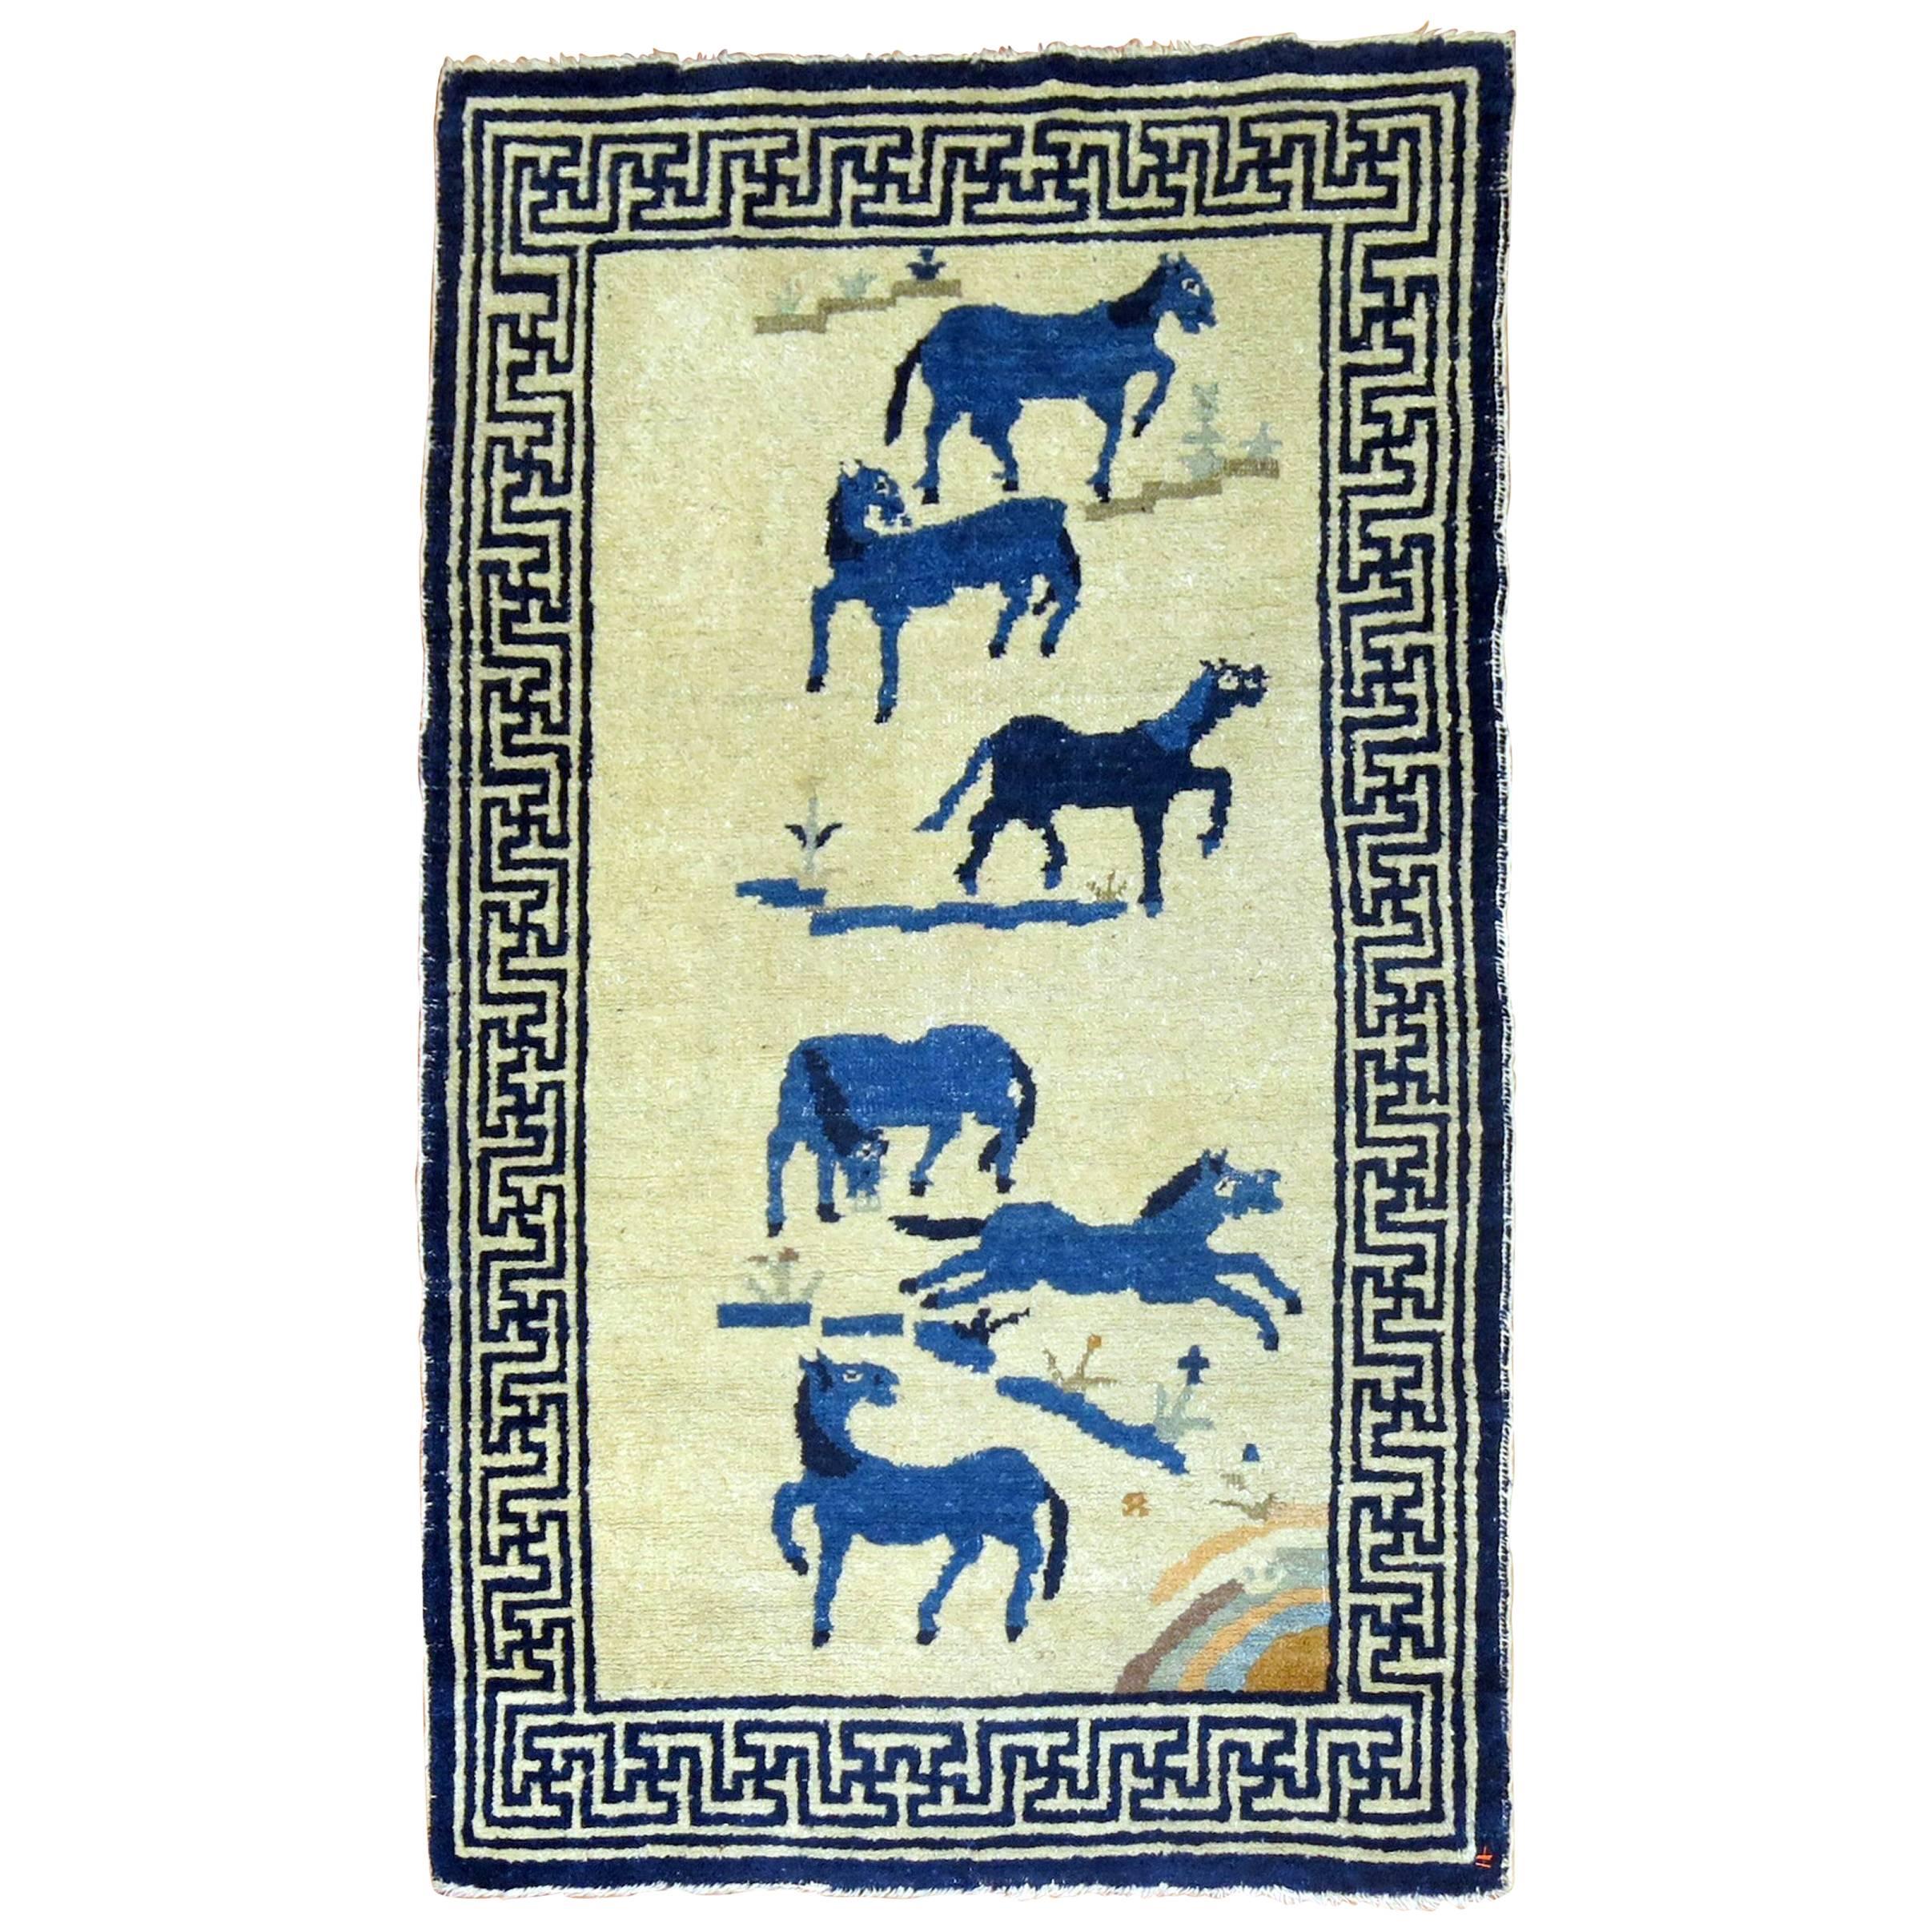 Horses Chinese Antique Pictorial Rug